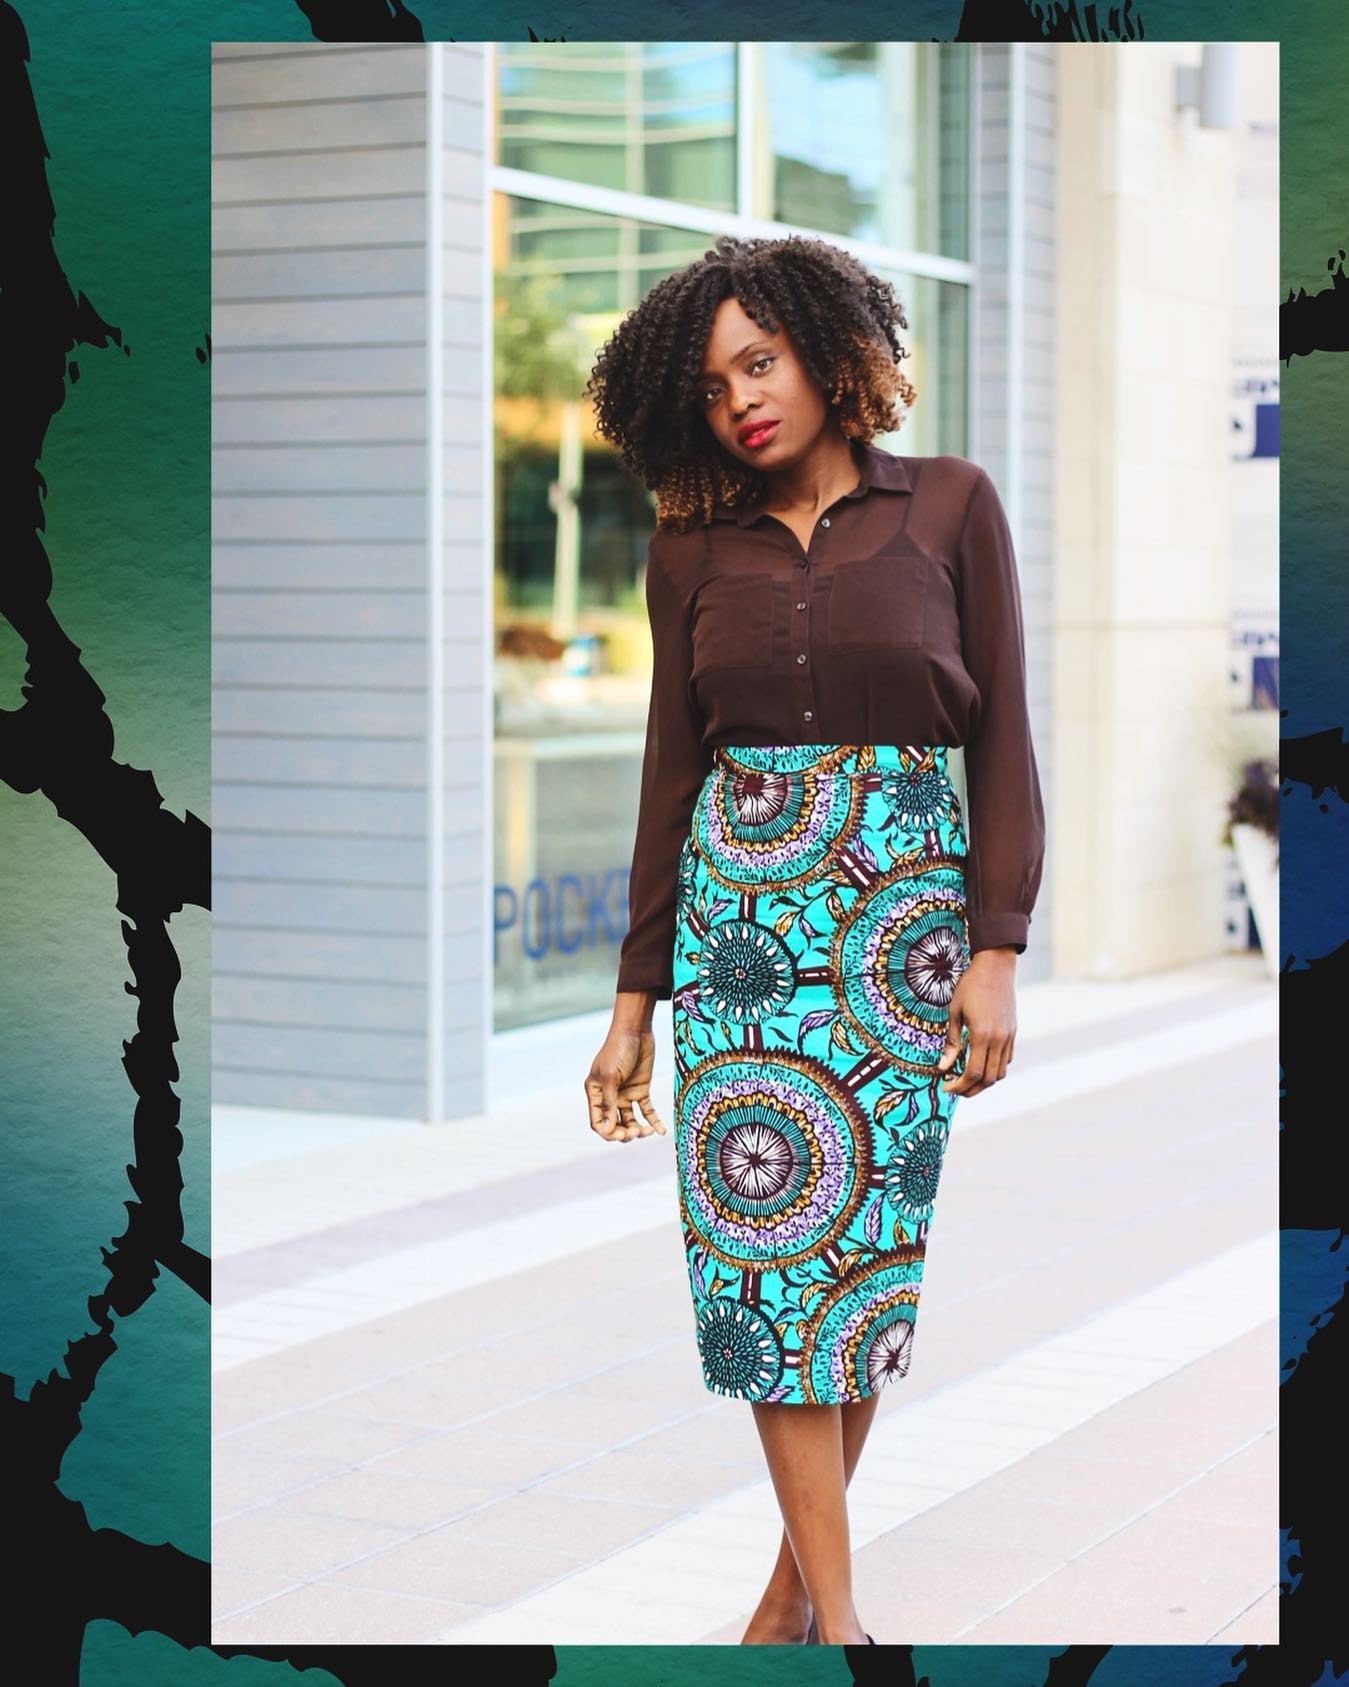 Colorful Aqua Pencil Skirt with Brown Blouse